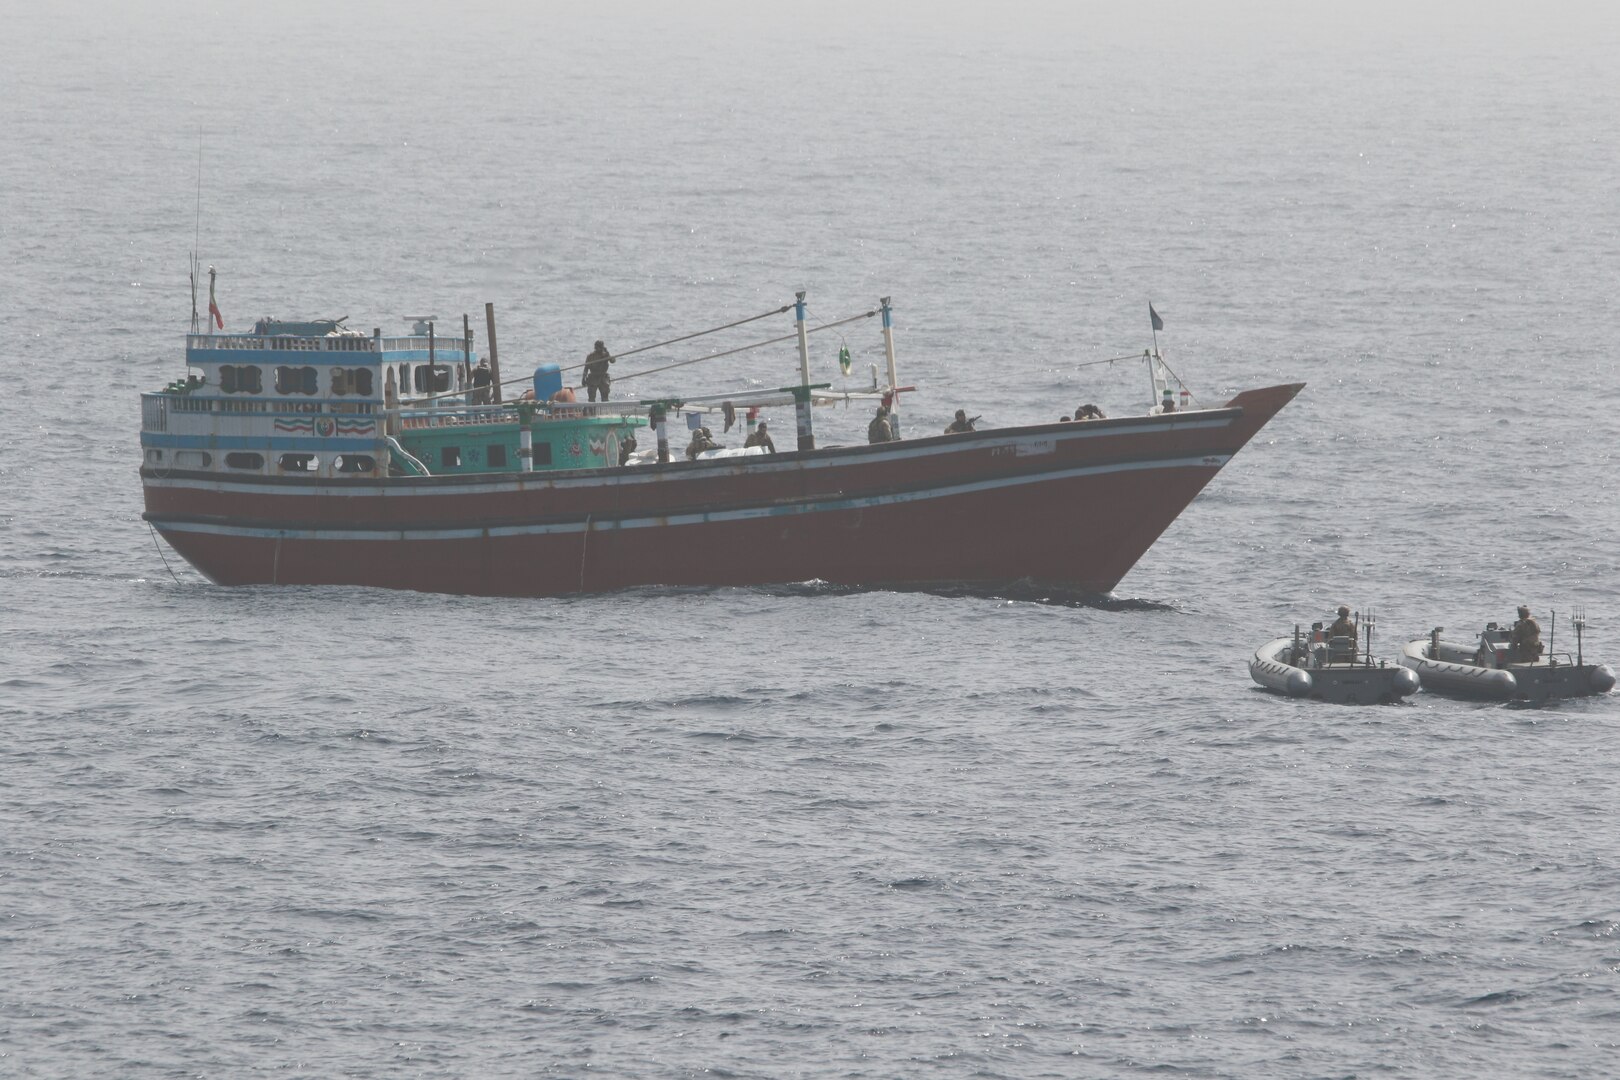 220516-N-TT059-1001 GULF OF OMAN (May 16, 2022) An interdiction team from guided-missile destroyer USS Momsen (DDG 92) approaches a fishing vessel May 16. The vessel was seized while transiting international waters in the Gulf of Oman.